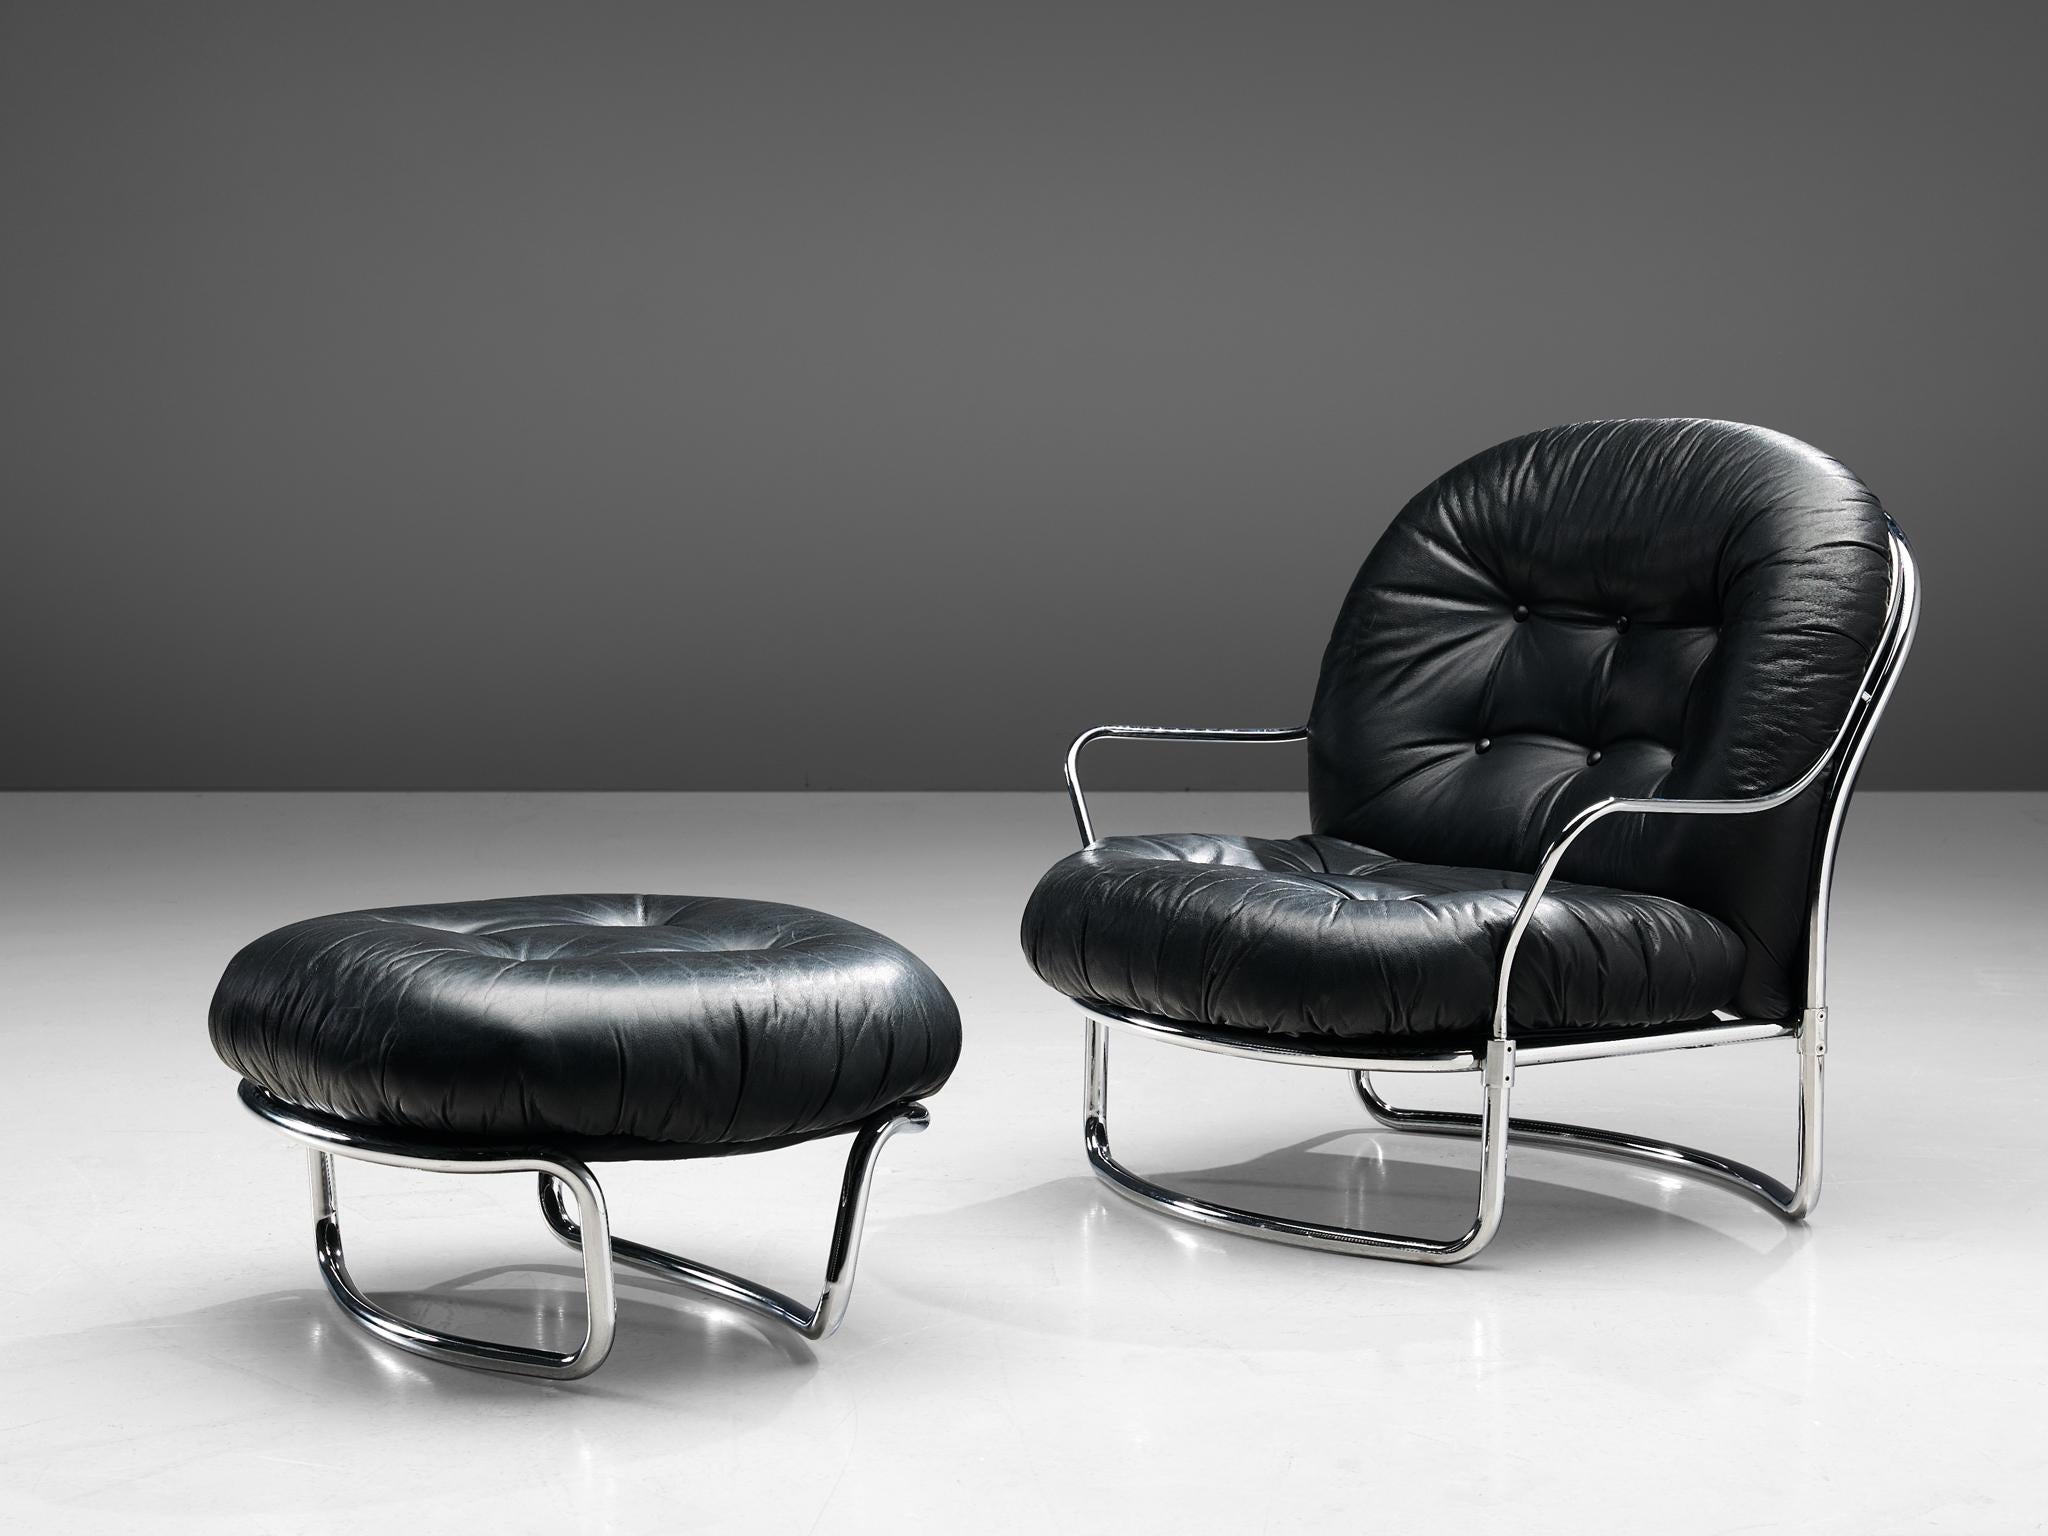 Carlo de Carli, lounge chair no. 915 with ottoman, metal and leather, Italy, 1969.

Elegant, tubular armchair designed by Carlo di Carli in 1969, manufactured by Cinova, Italy. The chair features a curved, chromed frame that holds the tufted,